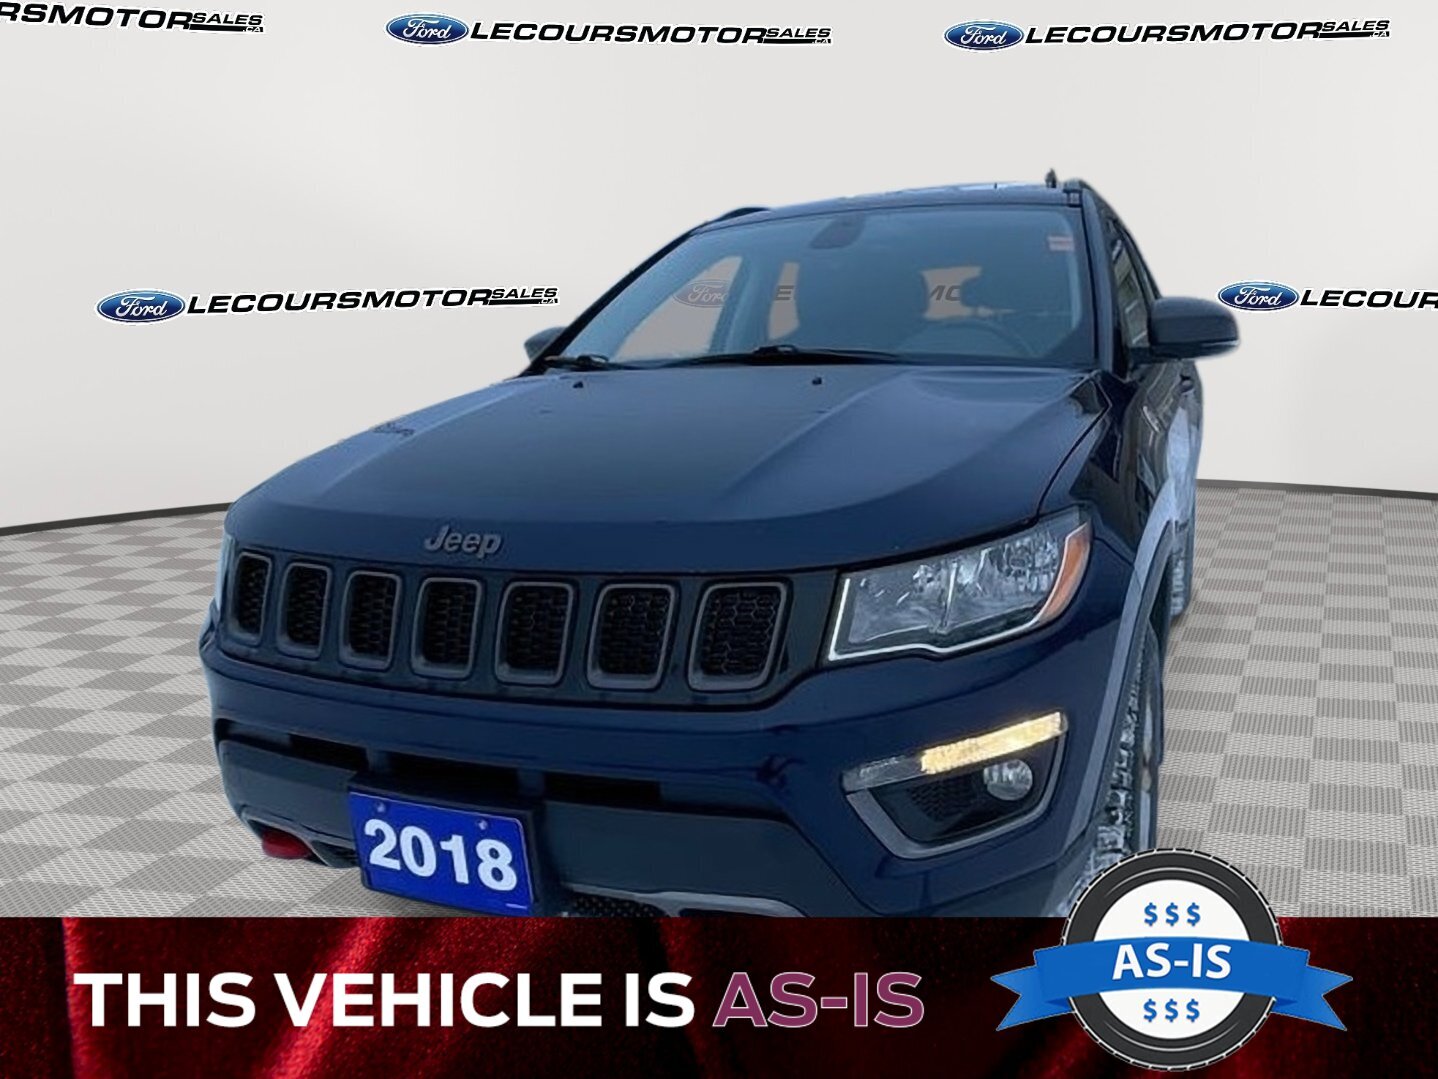 2018 Jeep Compass AS IS | CONTACT US FOR MORE INFO |